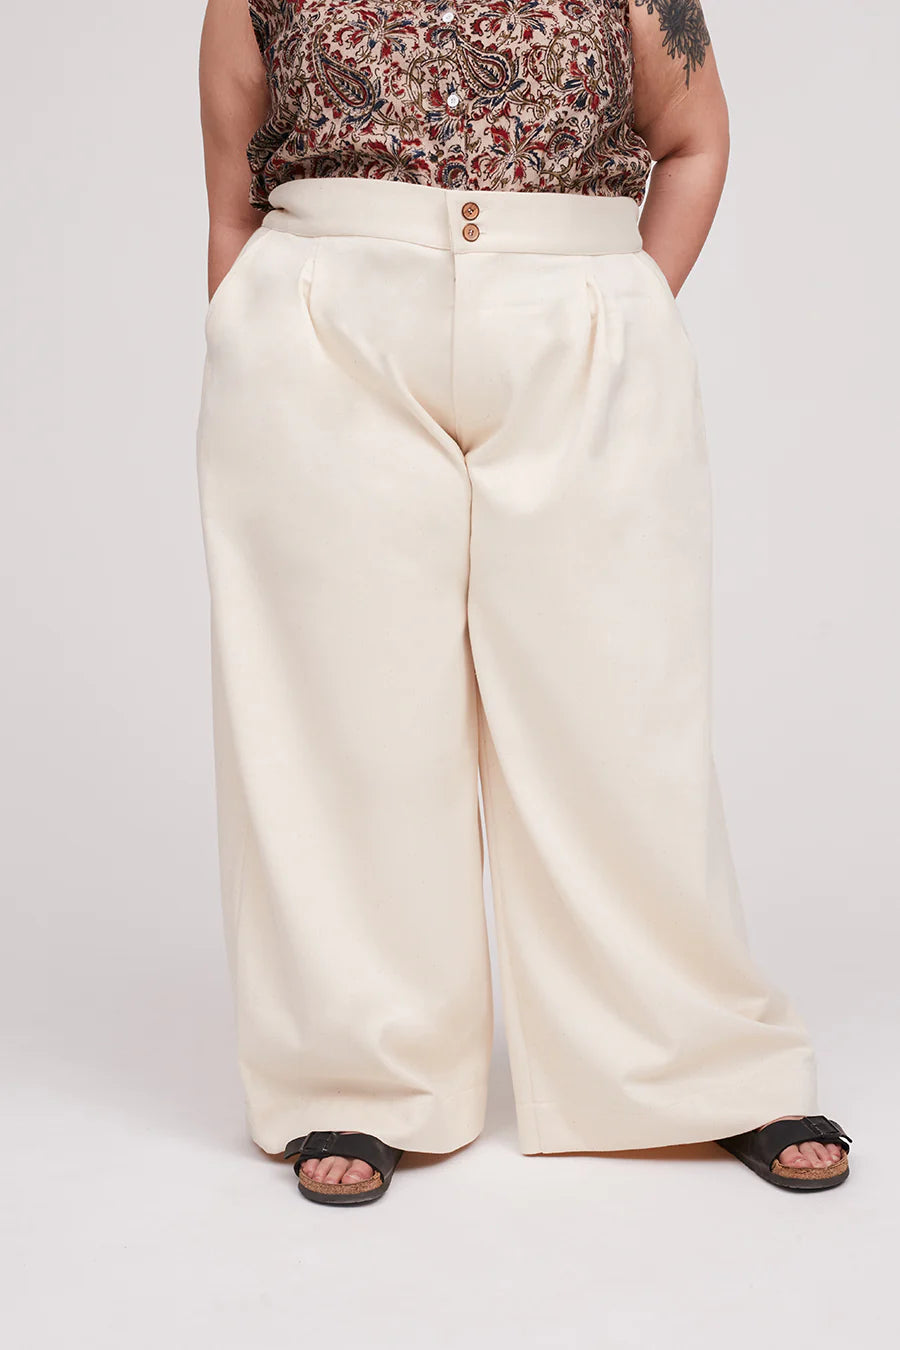 The Modern Sewing Co. Spring Trousers - PDF Pattern